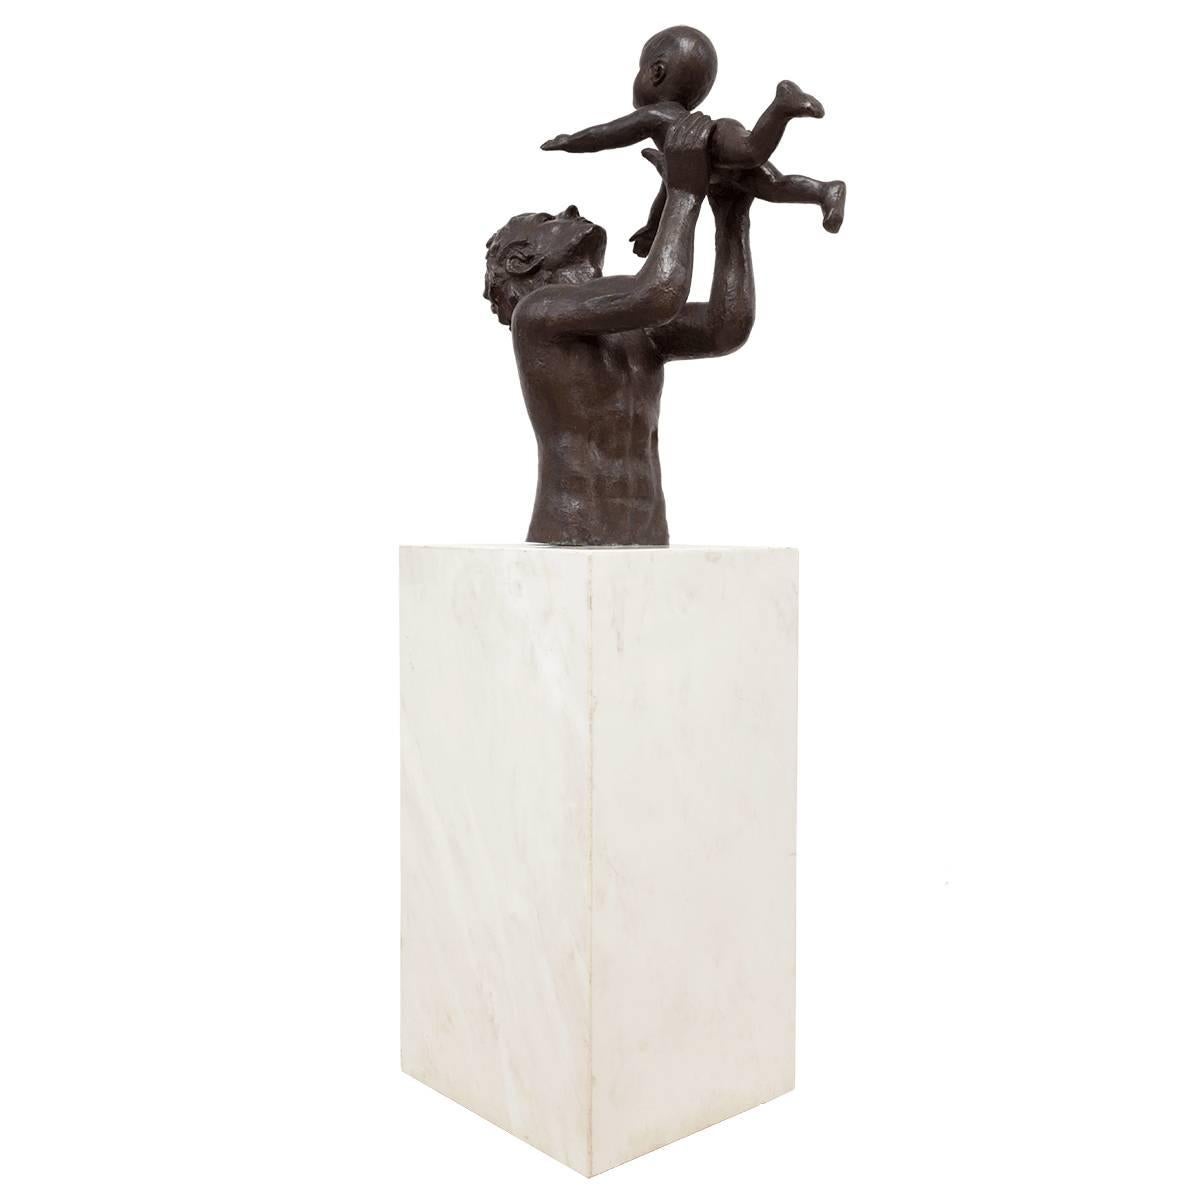 Victor Salmones Figurative Sculpture - Huge Bronze and Marble Sculpture FIRST BORN Mexican Modernist